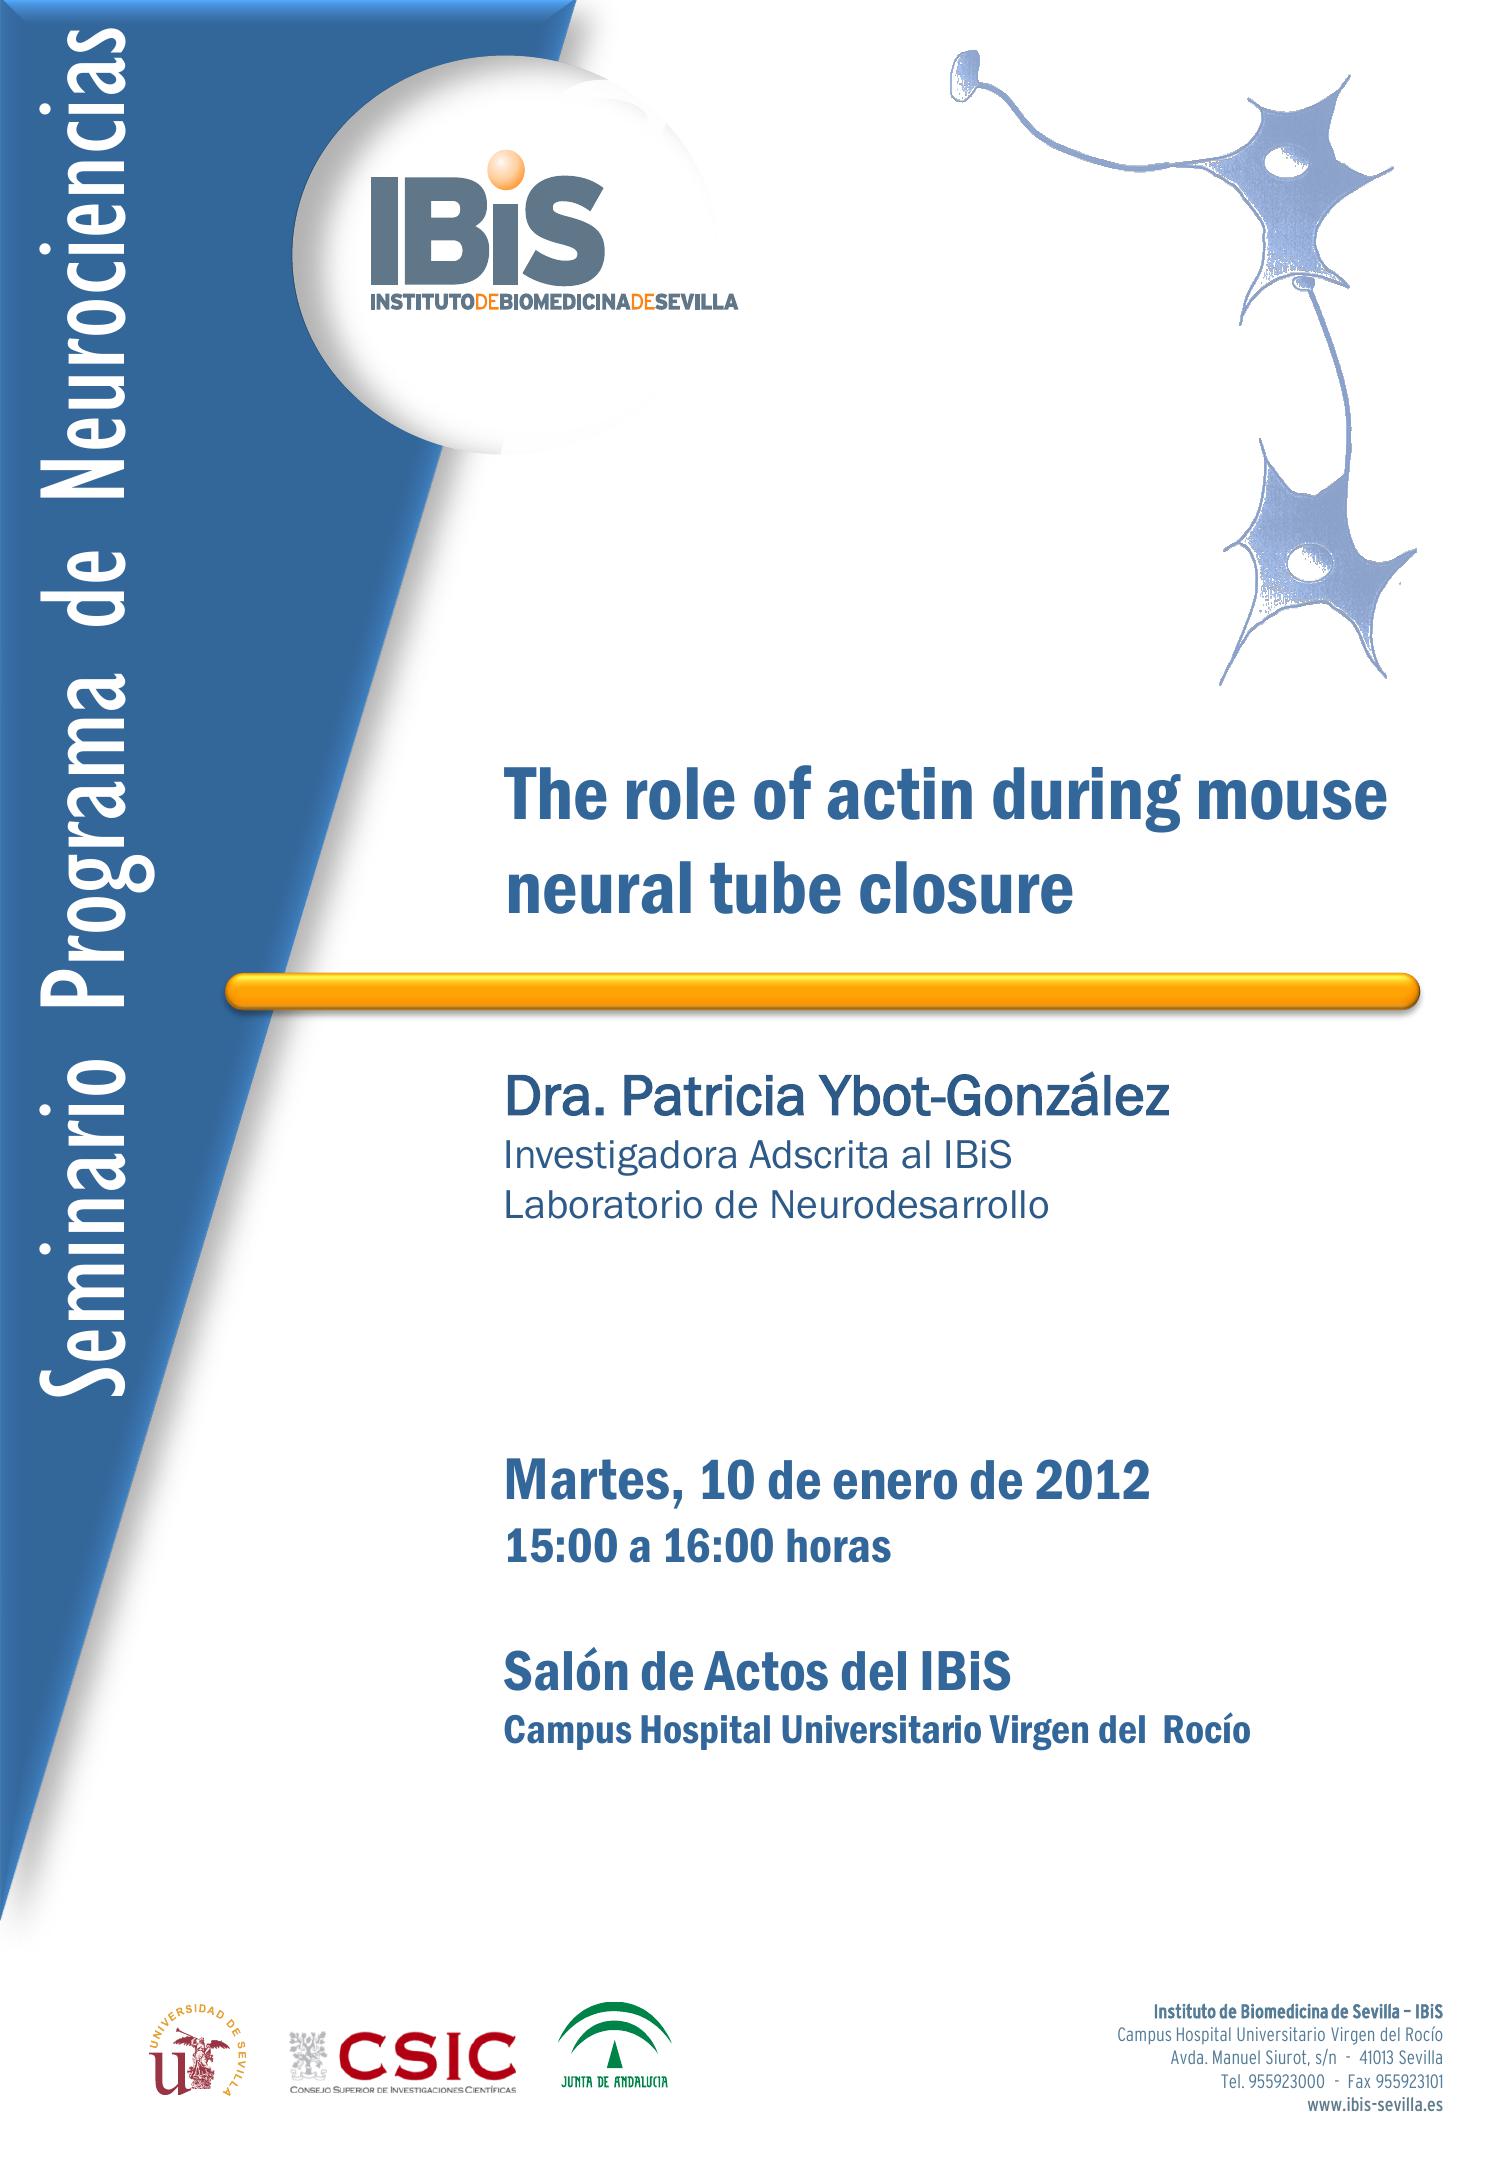 Poster: The role of actin during mouse neural tube closure